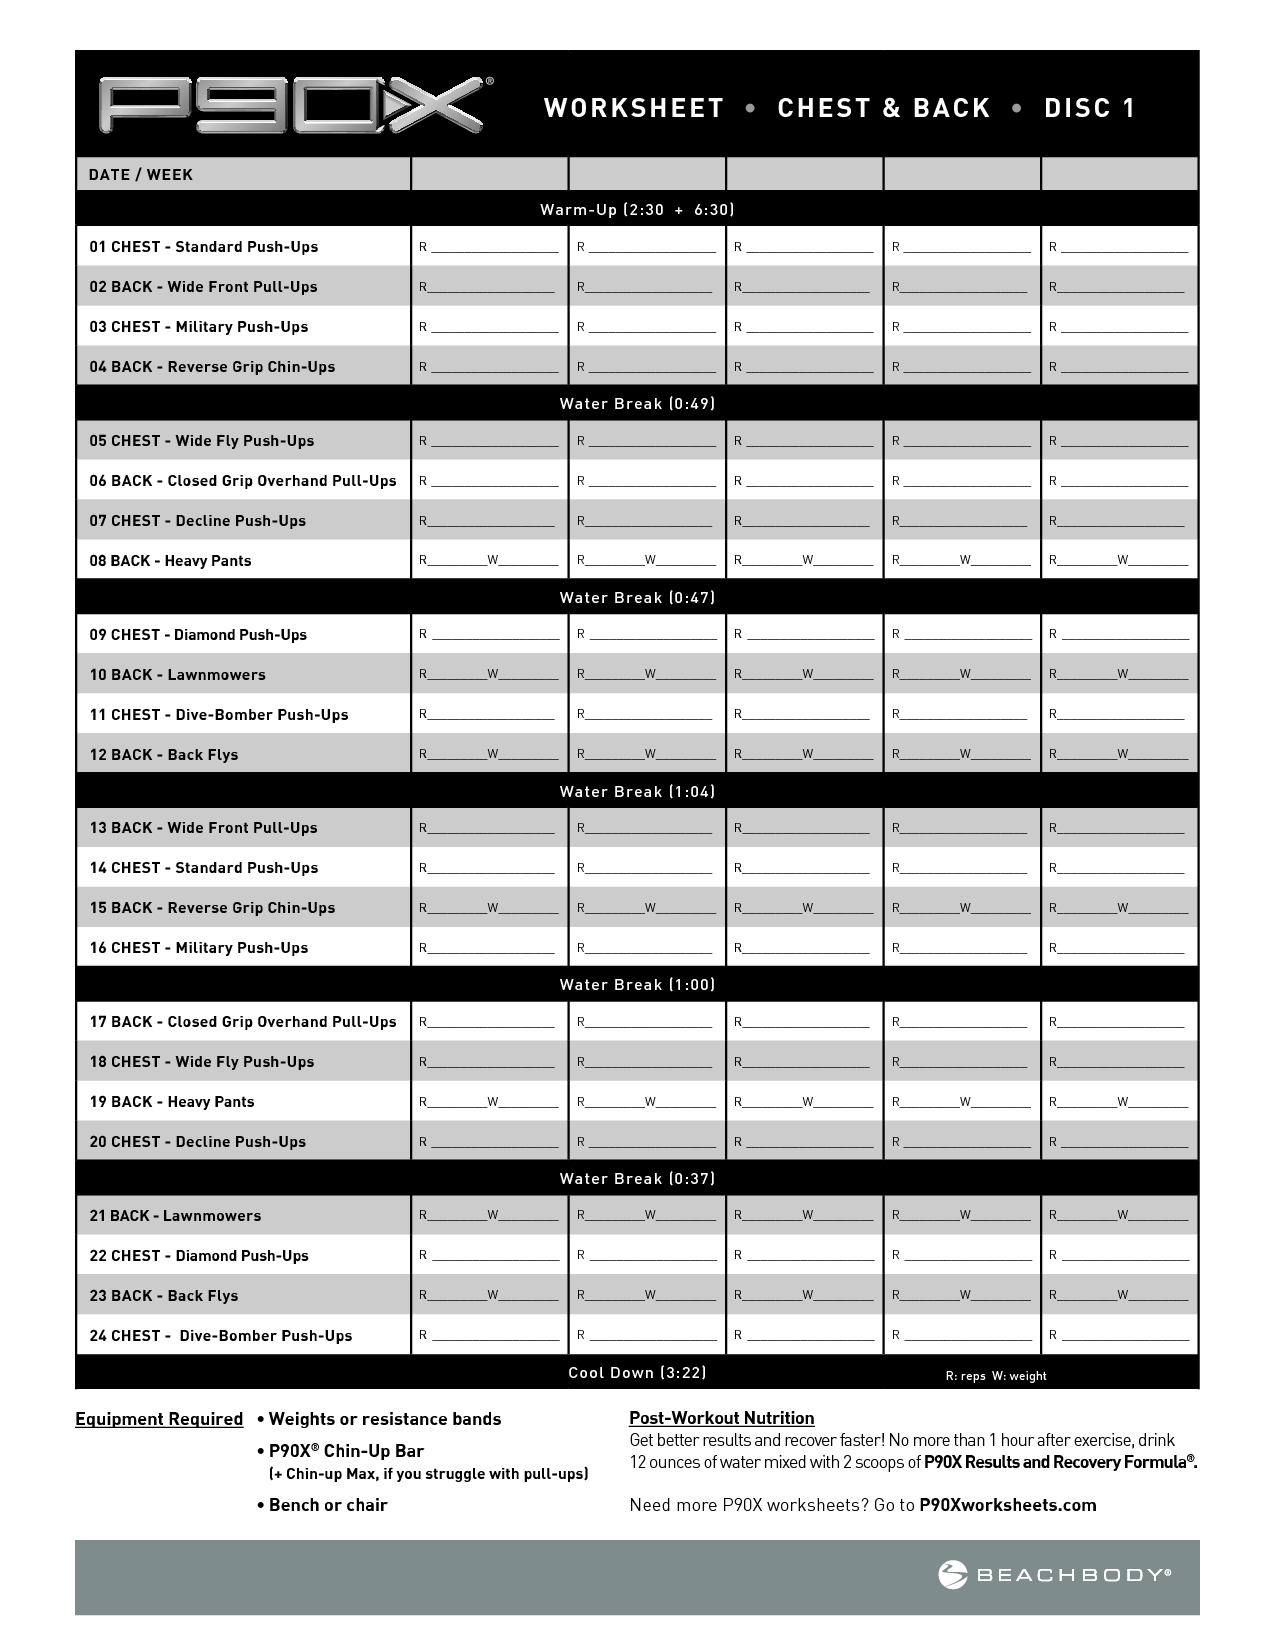 P90X Excel Spreadsheet Intended For P90X Classic Routine Excel Spreadsheet  Homebiz4U2Profit